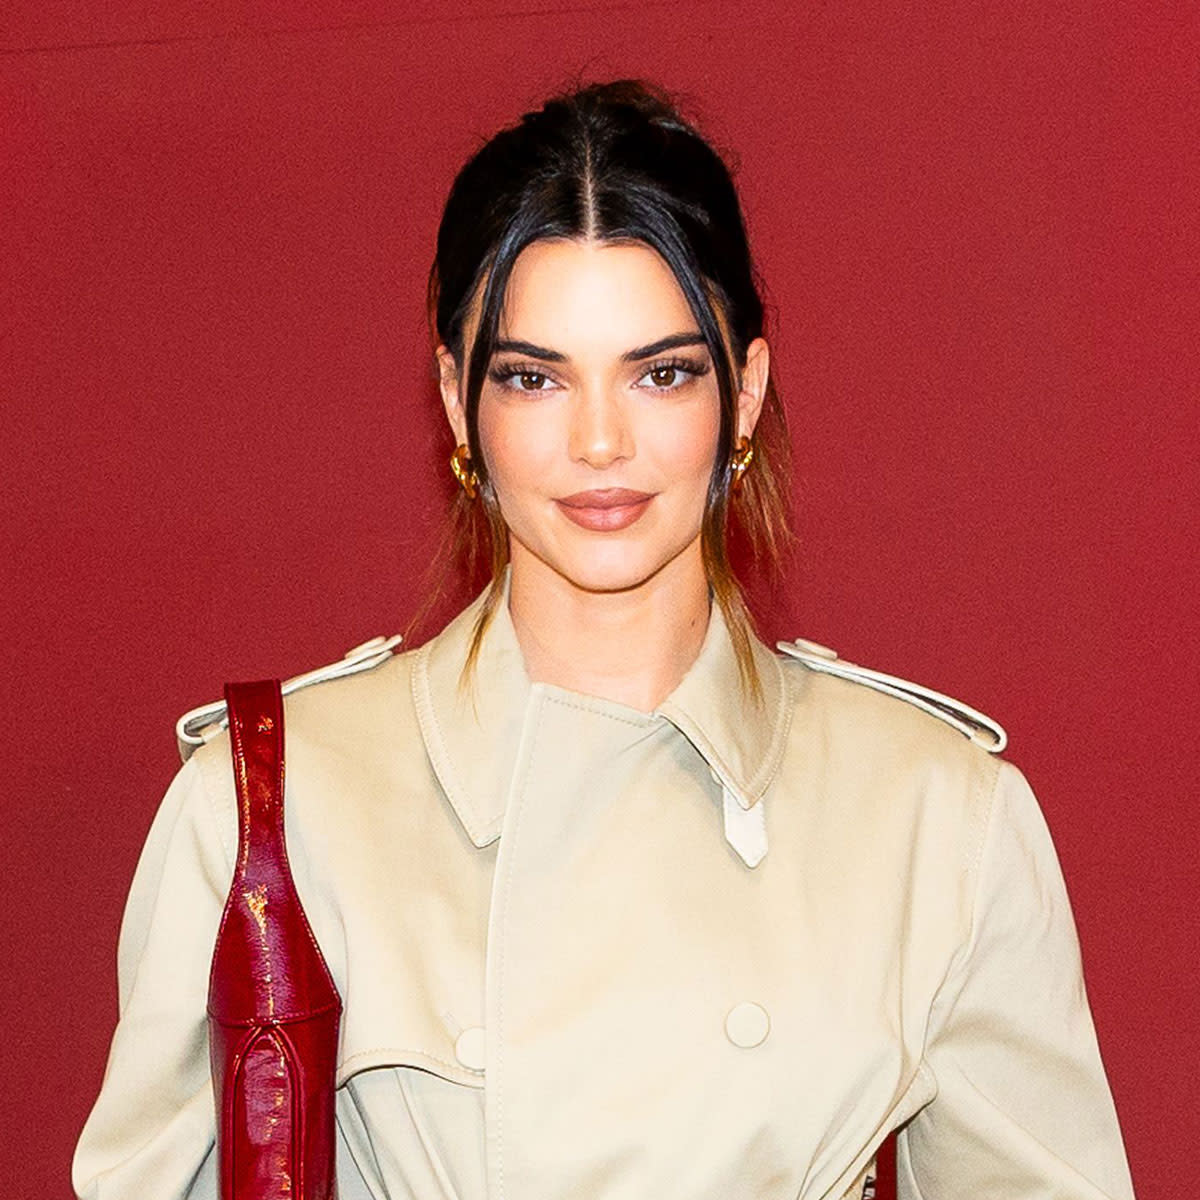 Kendall Jenner Rocks A Stylish Trench Dress As She Attends Milan Fashion Week With Bad Bunny 